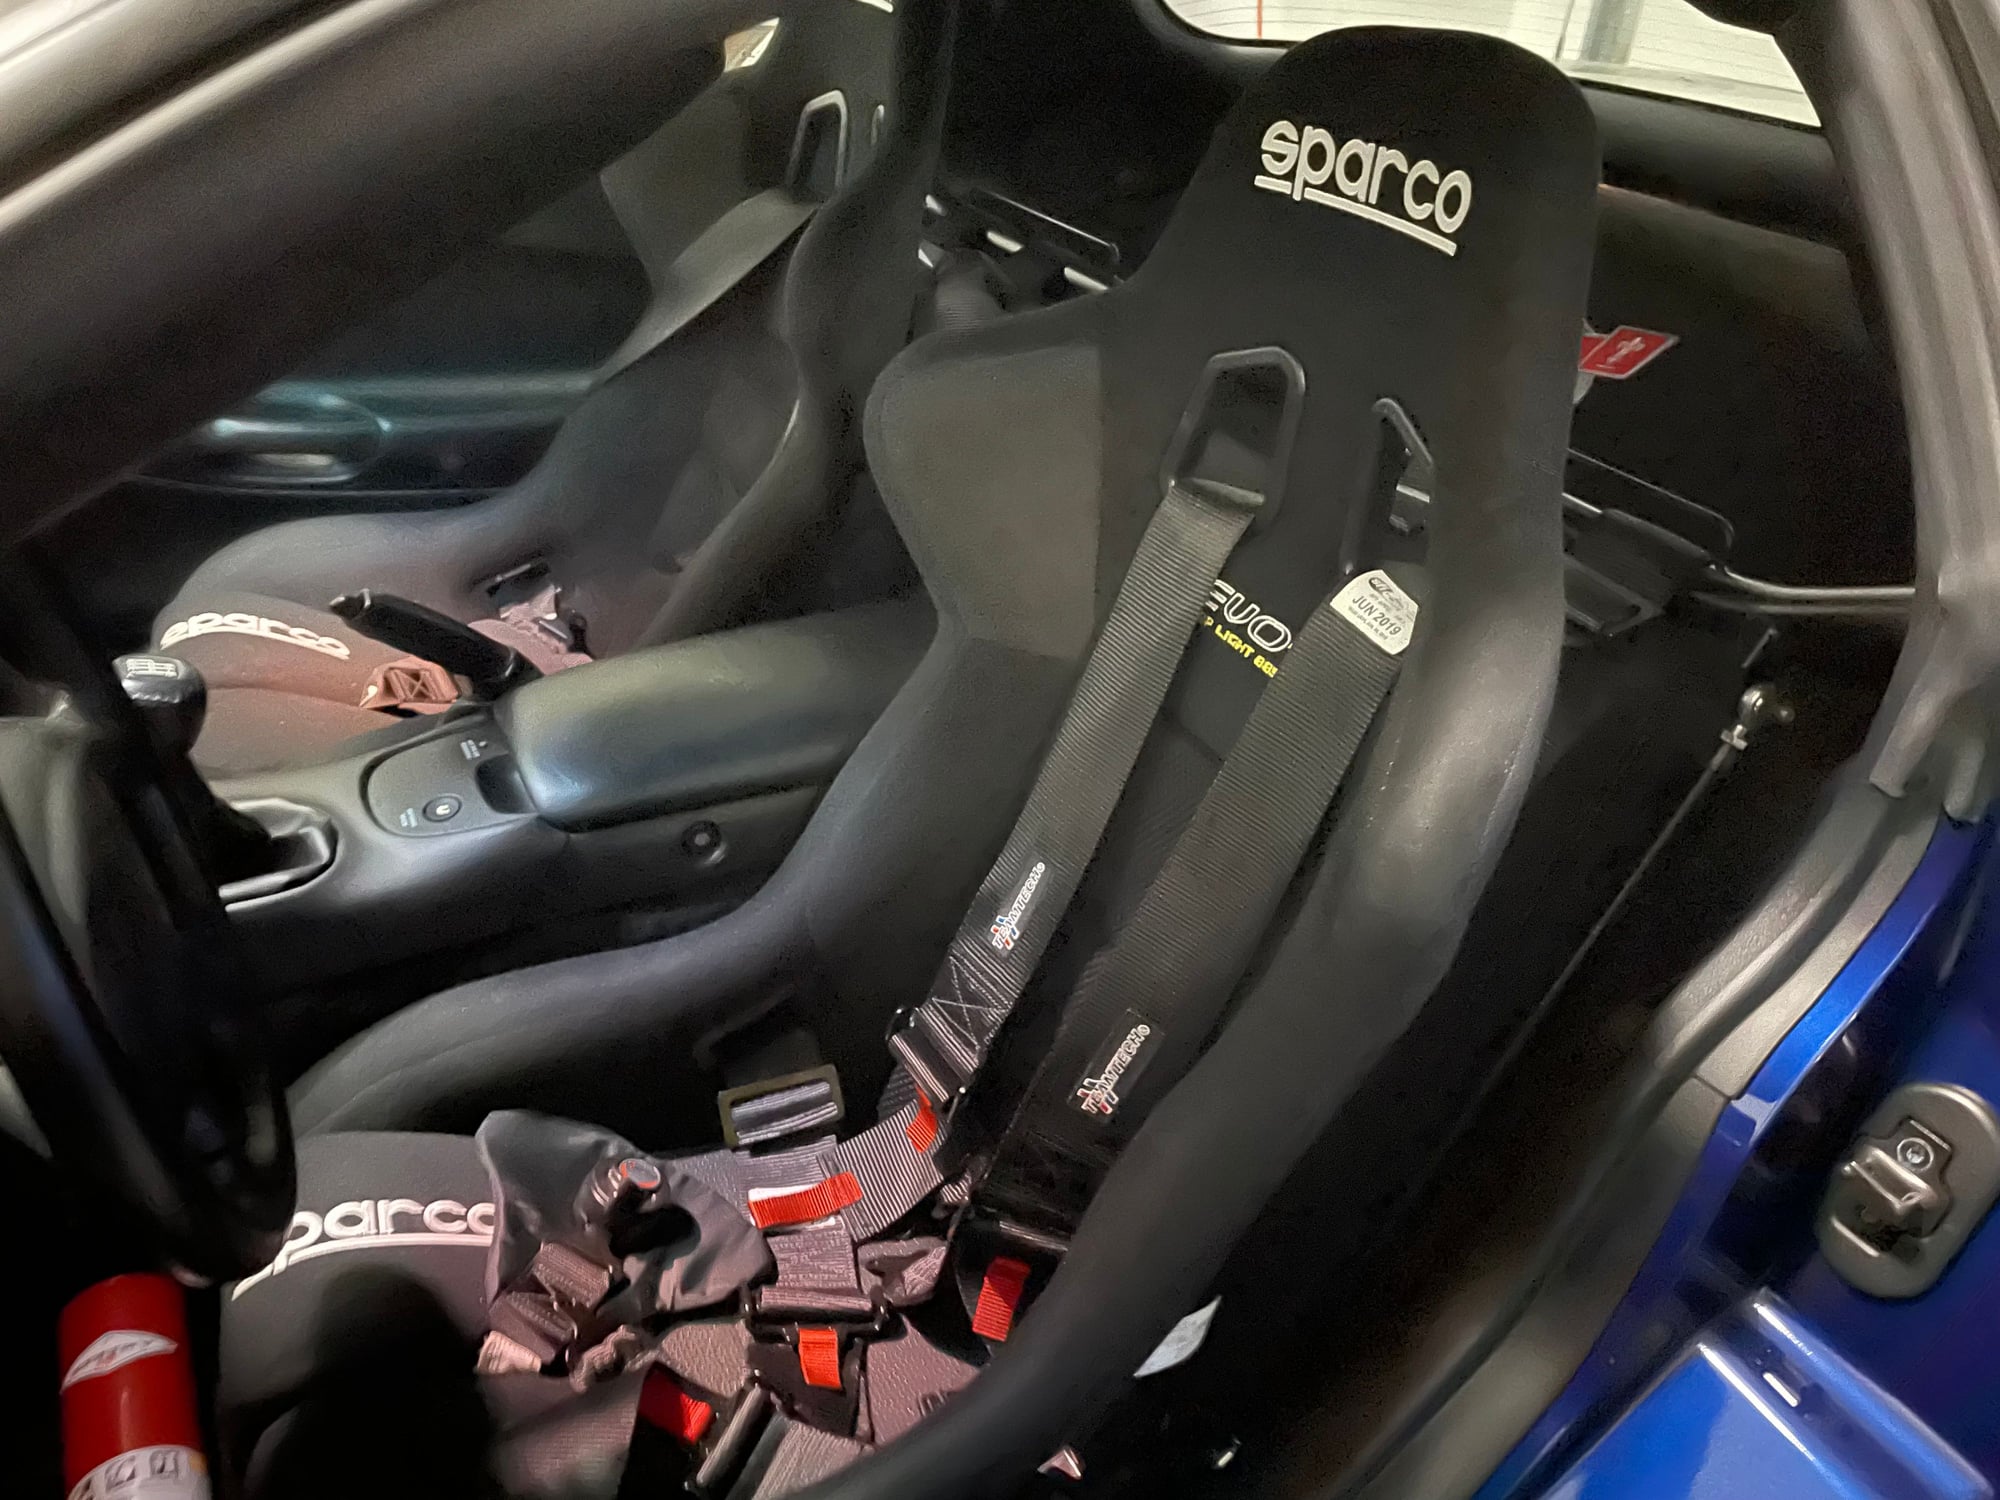 FS (For Sale) Sparco Seats w/5 Point harnesses along with harness bar ...